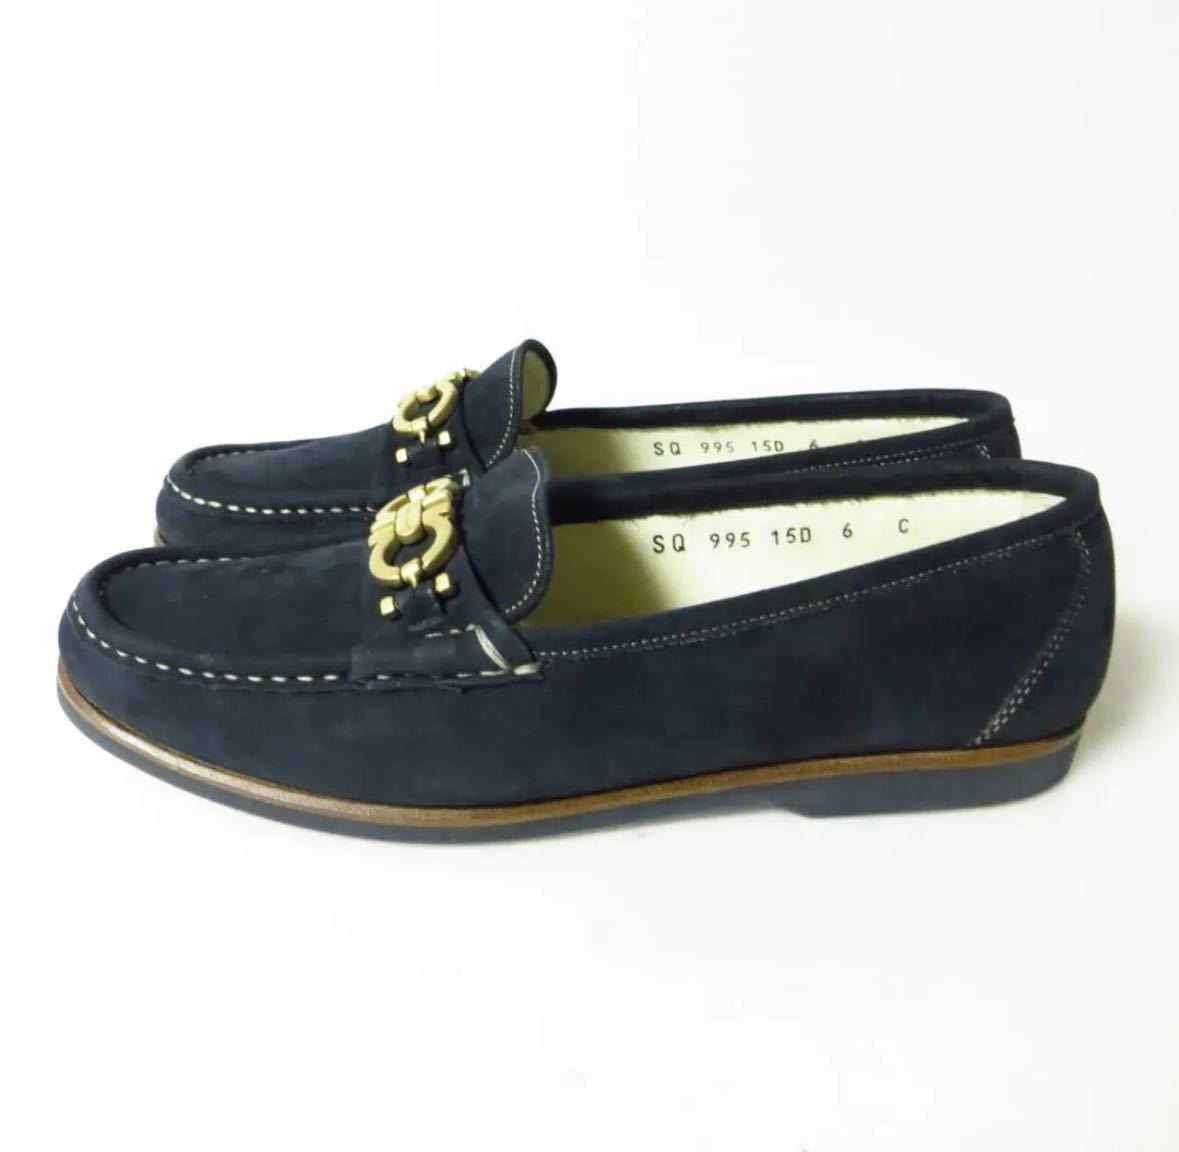 [ apparel ]* beautiful goods * Ferragamo Ferragamo sport Loafer gun chi-ni Italy made 6 approximately 23. leather shoes lady's popular stylish shoes 